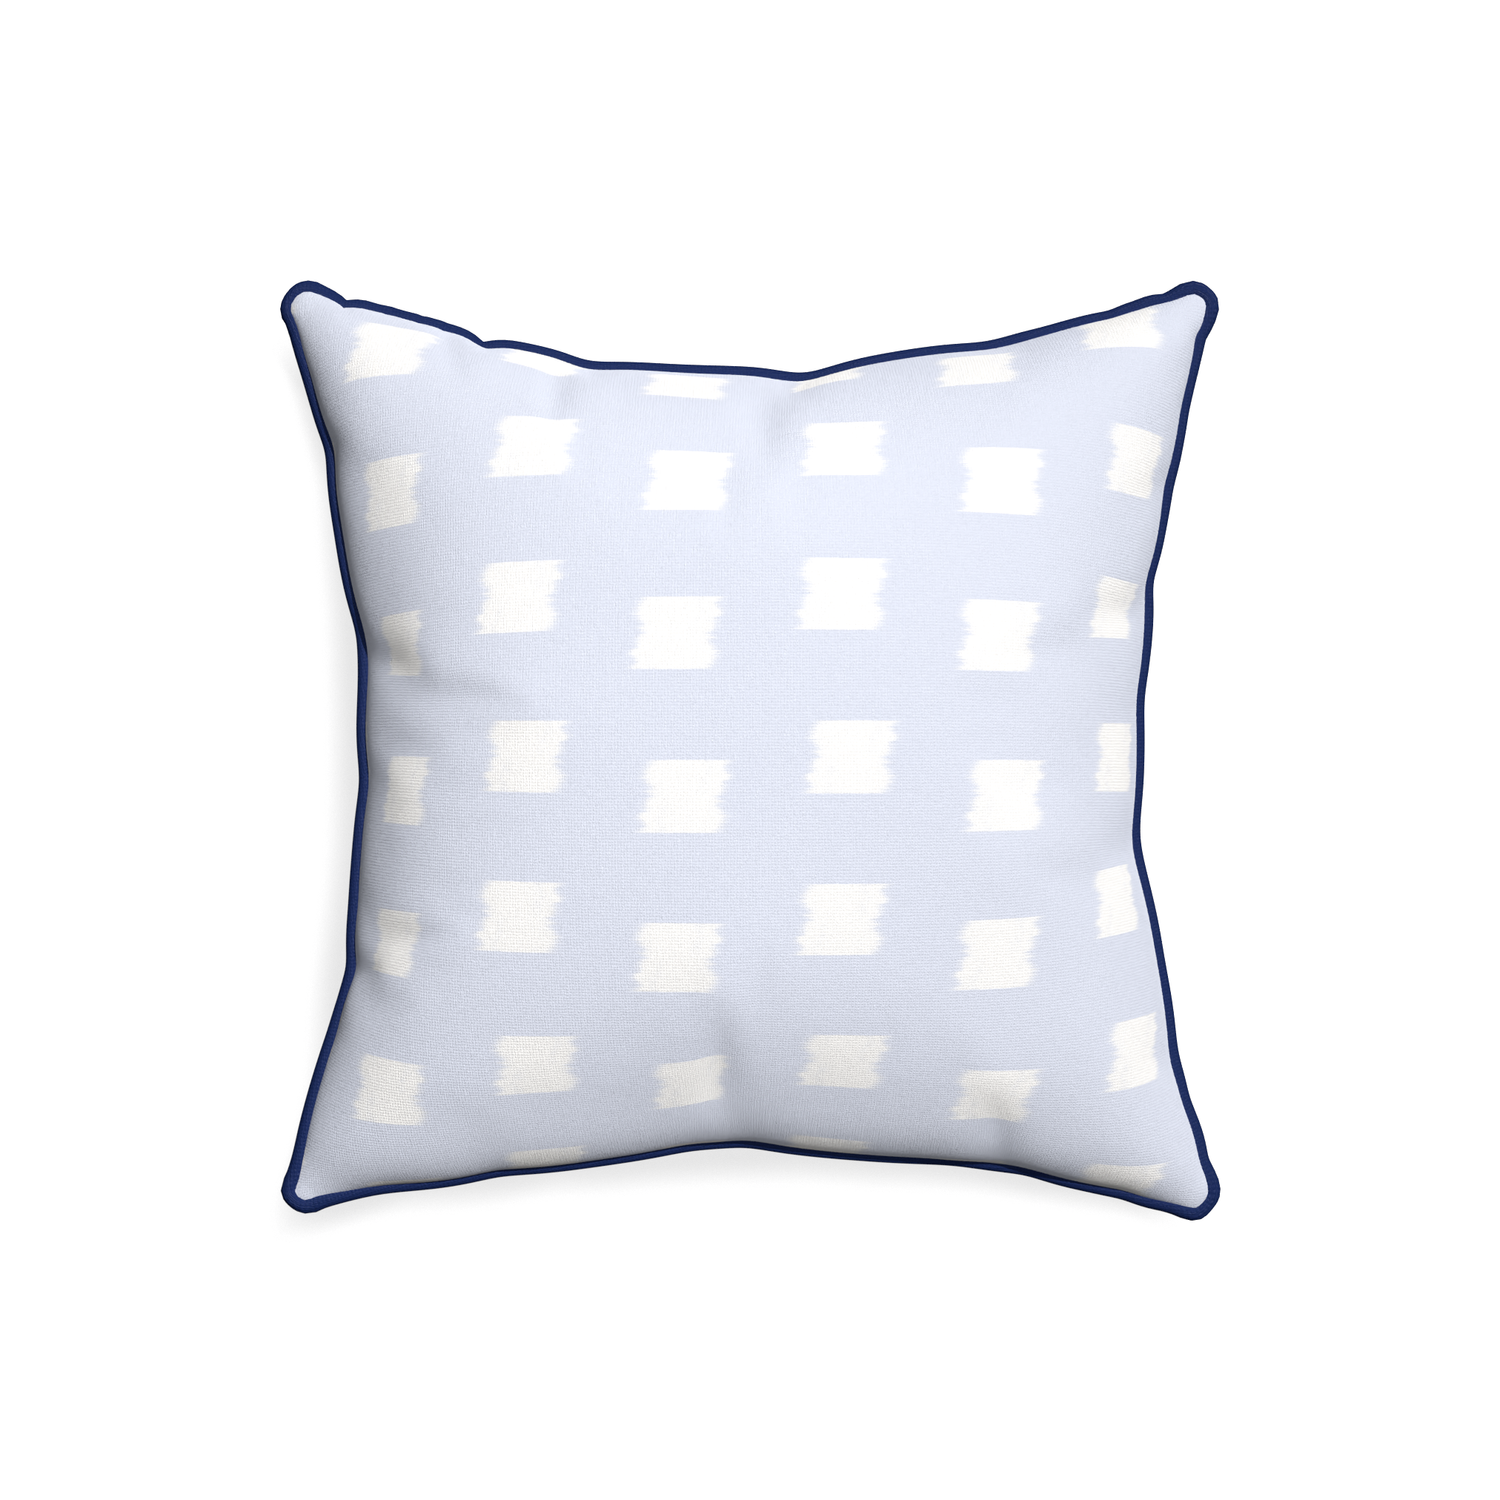 20-square denton custom sky blue patternpillow with midnight piping on white background